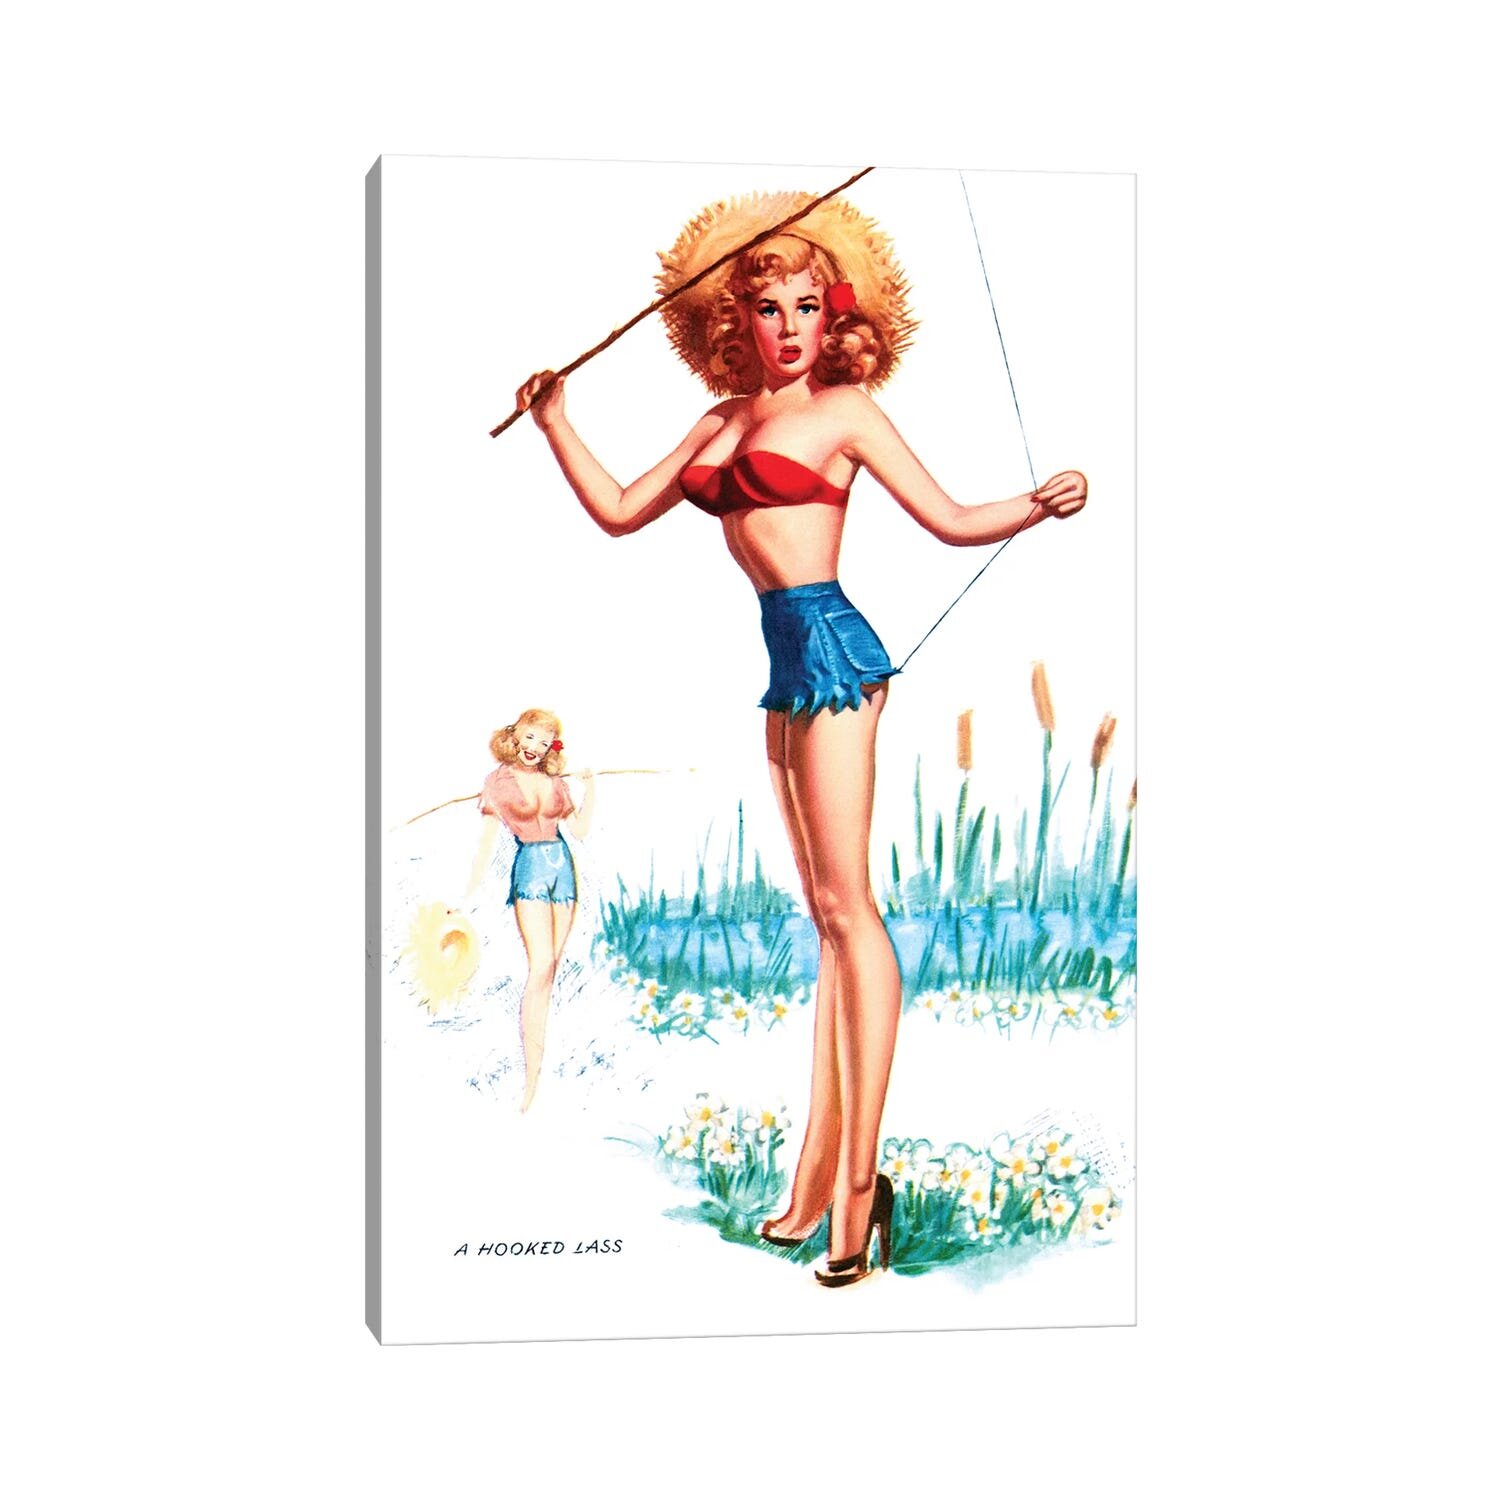 East Urban Home Gone Fishing Pin-up By T. N. Thompson On Canvas by Piddix Print